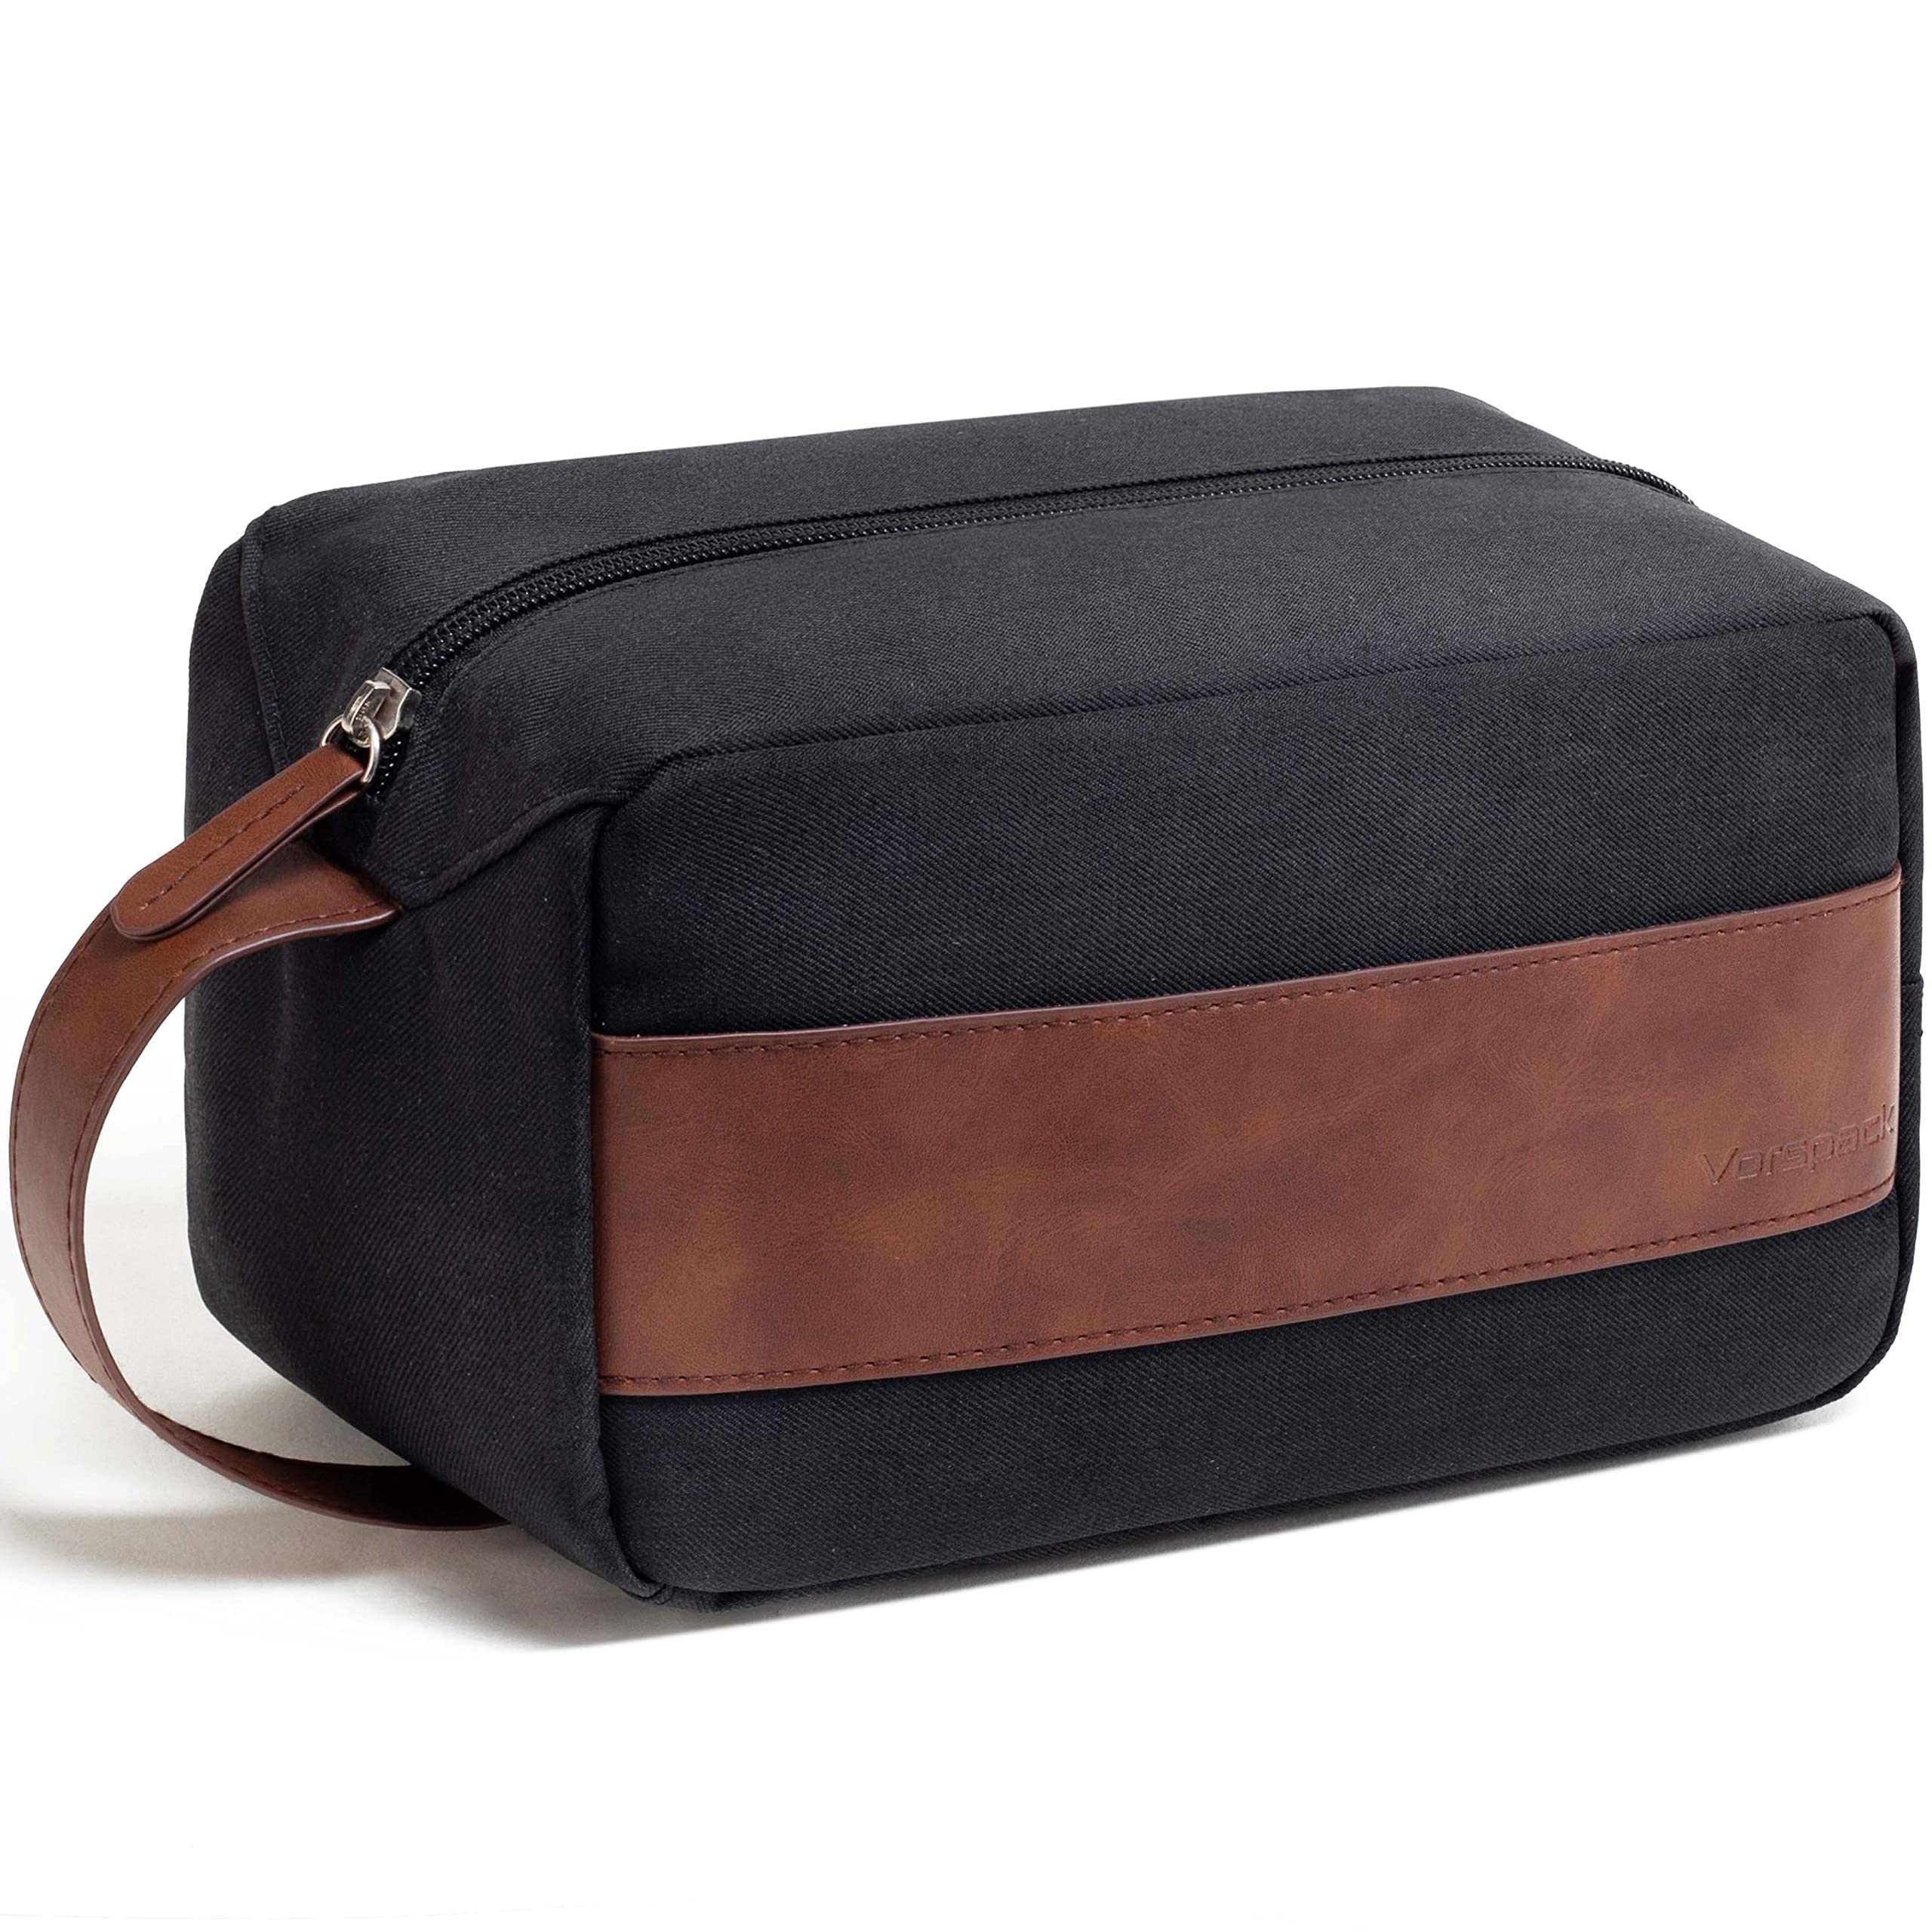 Water-resistant Leather Toiletry Bag For Men Large Travel Wash Bag